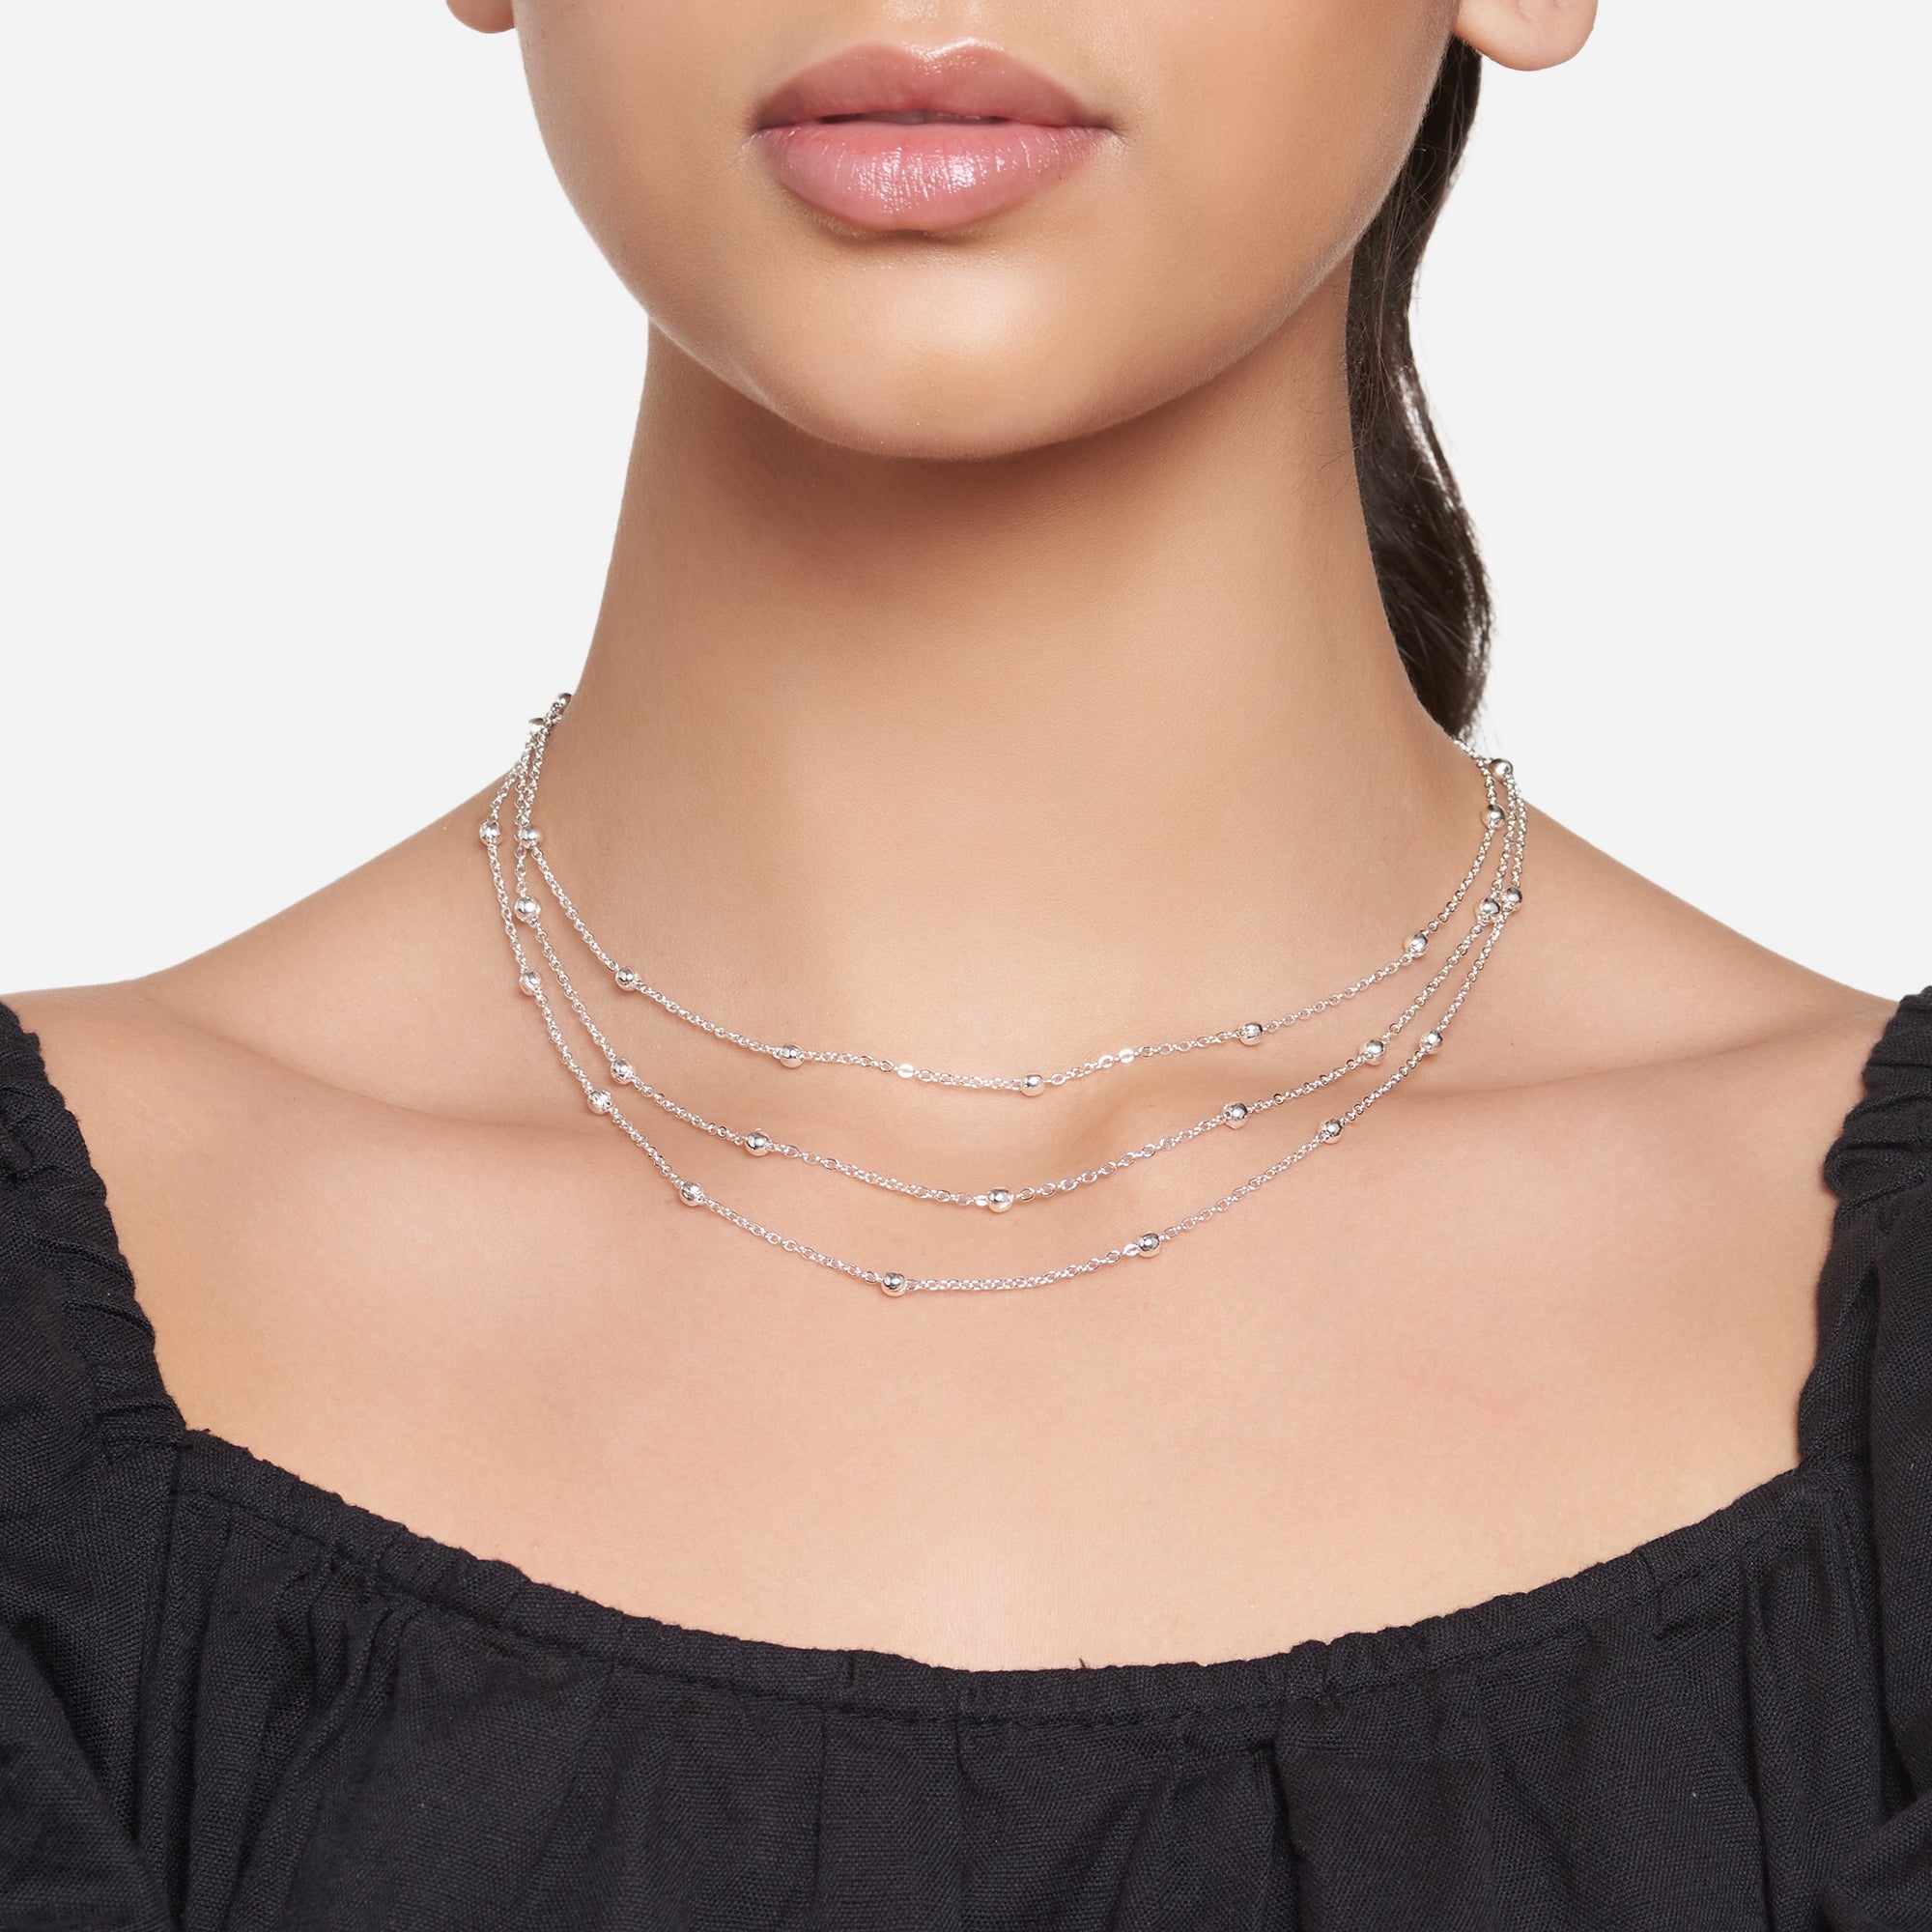 Accessorize London Women's Silver Layered Station Bead Necklace